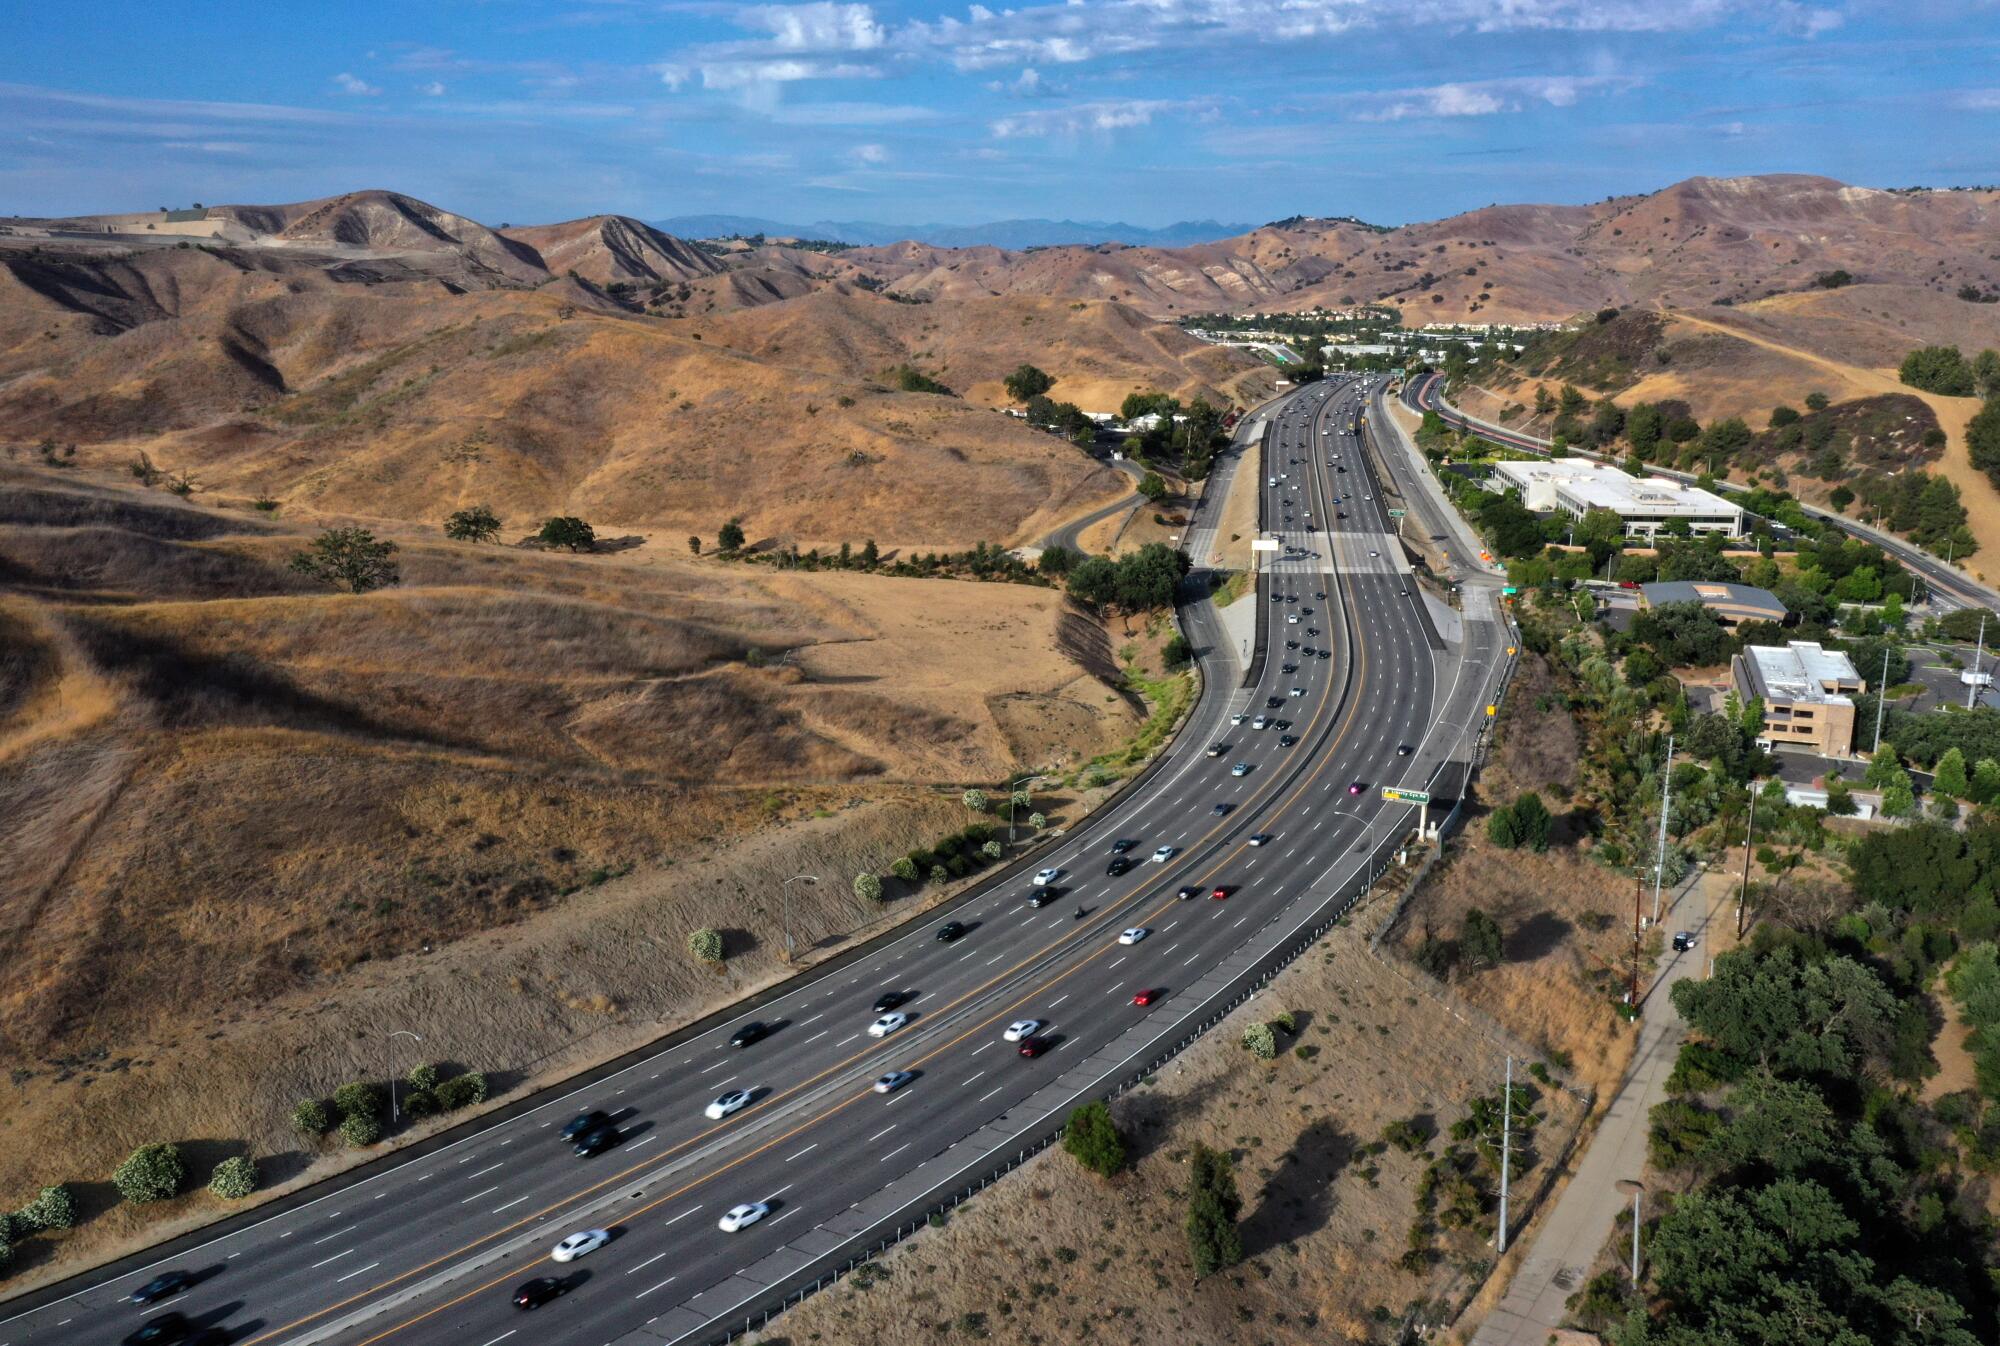 The 101 Freeway, which is impossible to safely cross, confines larger animals on either side of it.